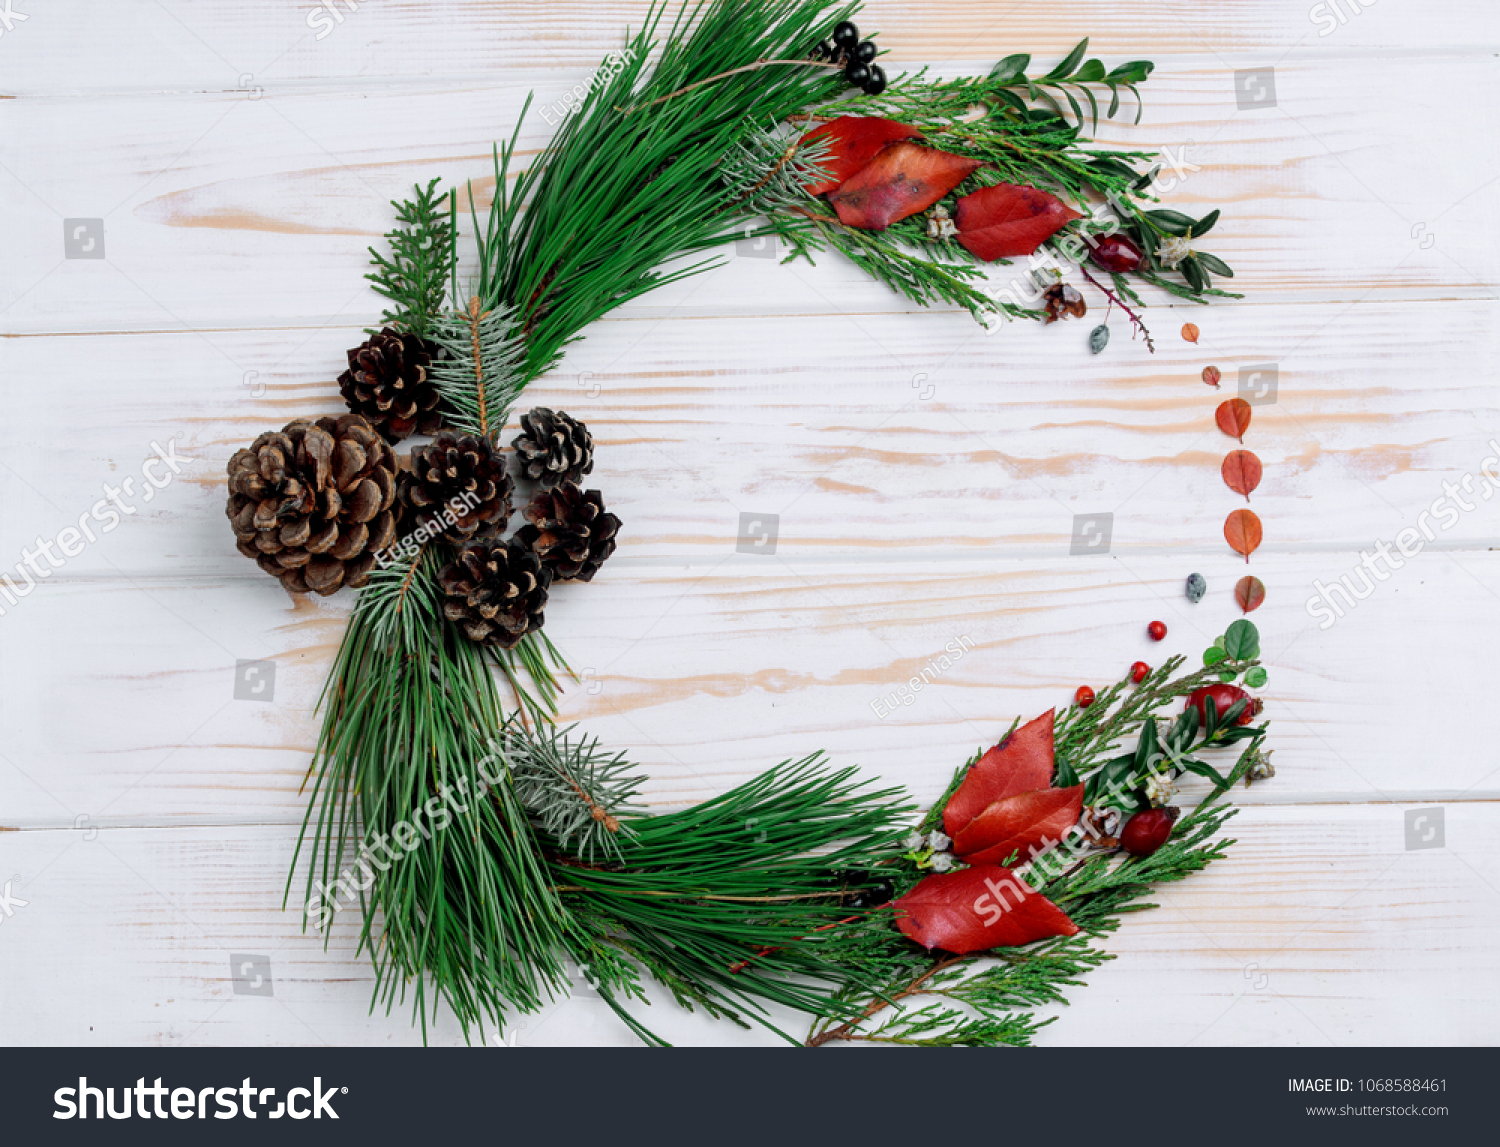 New Year's wreath of twig of twigs and carrots on the table #1068588461